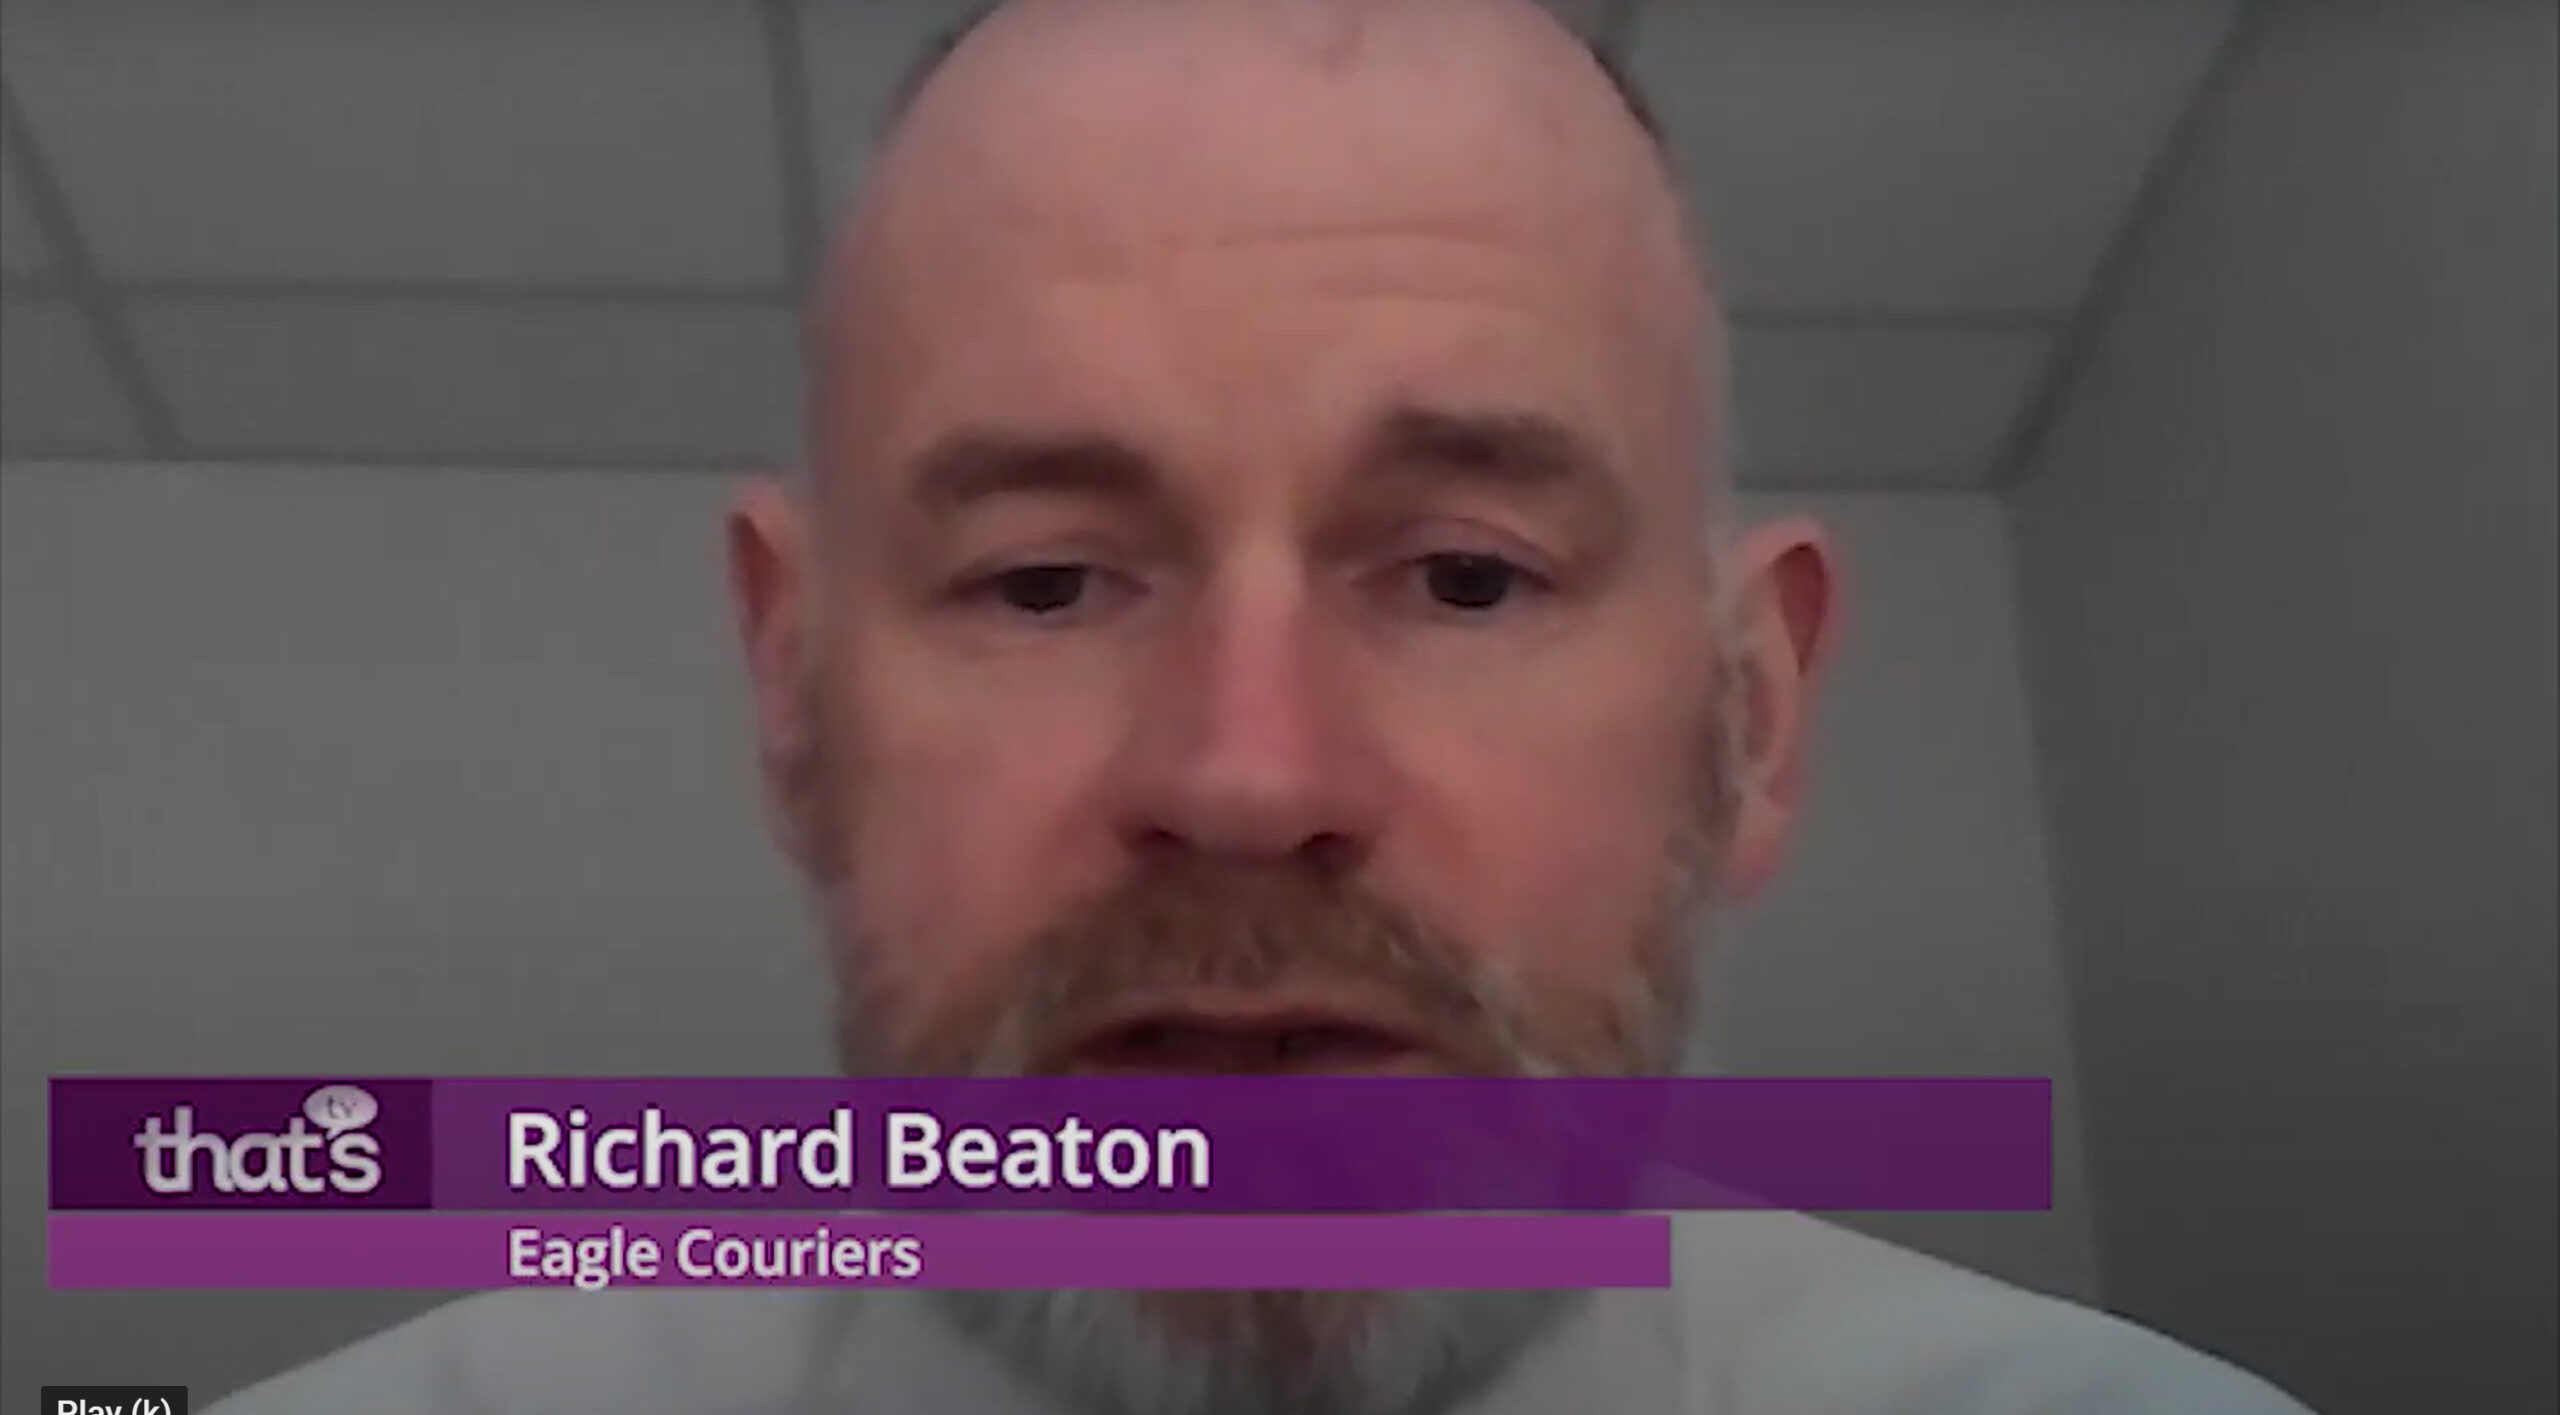 Richard Beaton of Scottish Courier company Eagle Couriers on That's TV